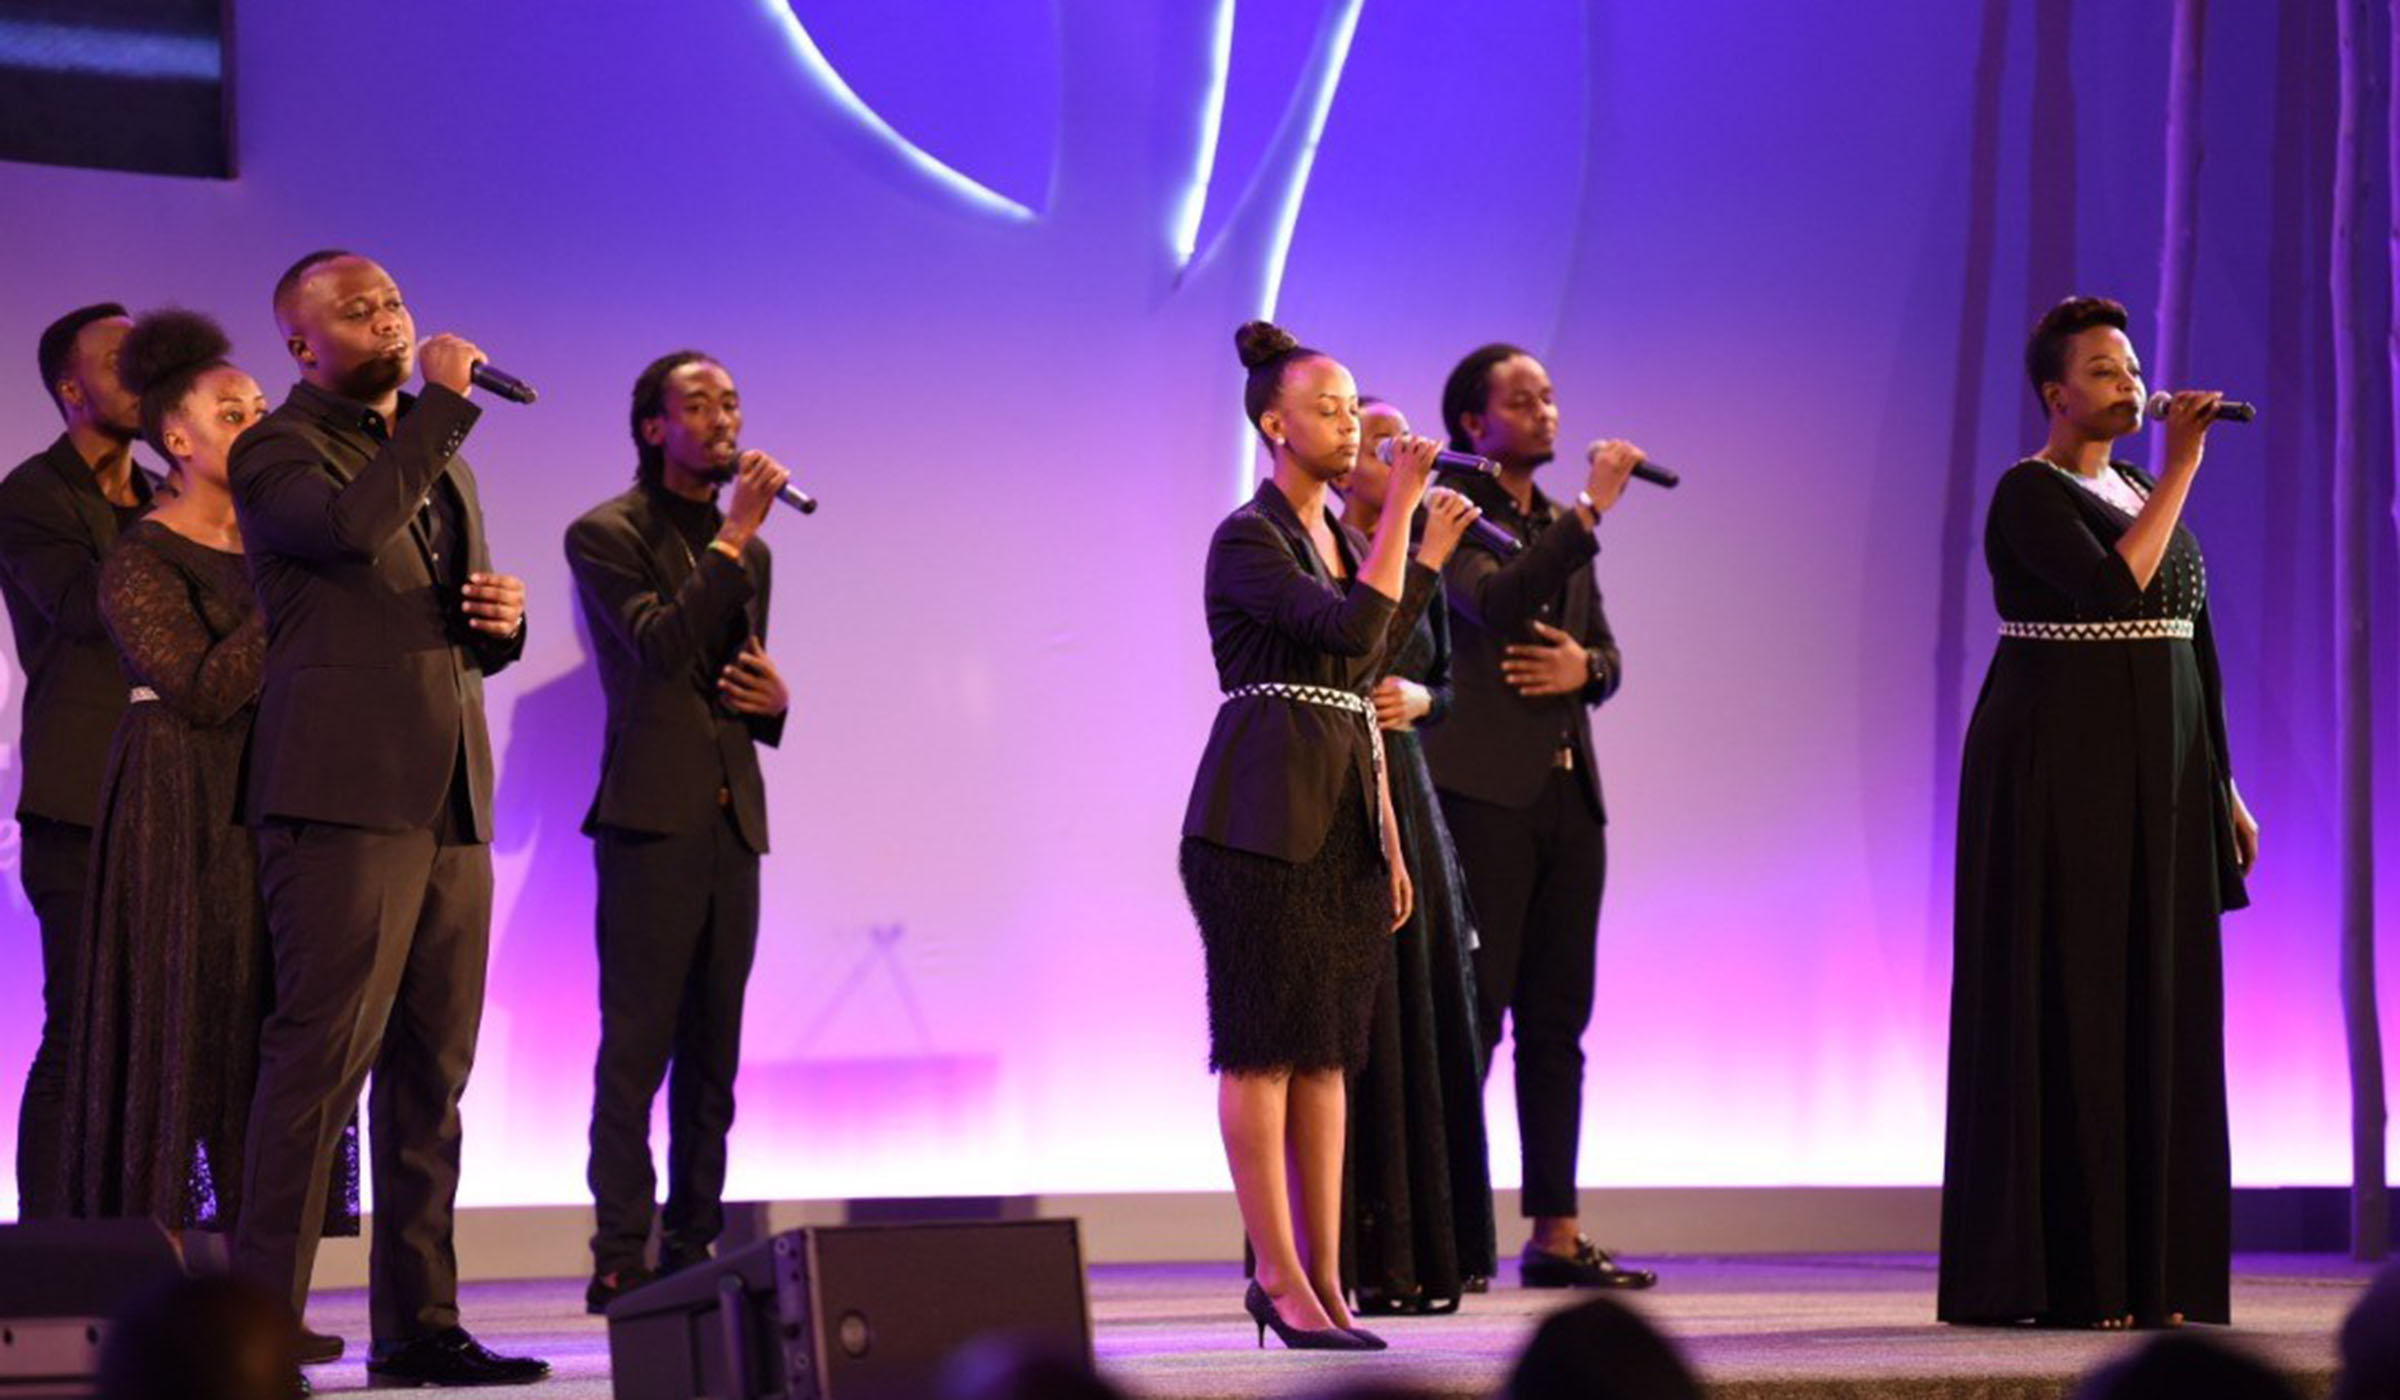 First row from left to right: King James, Knowless, and Aline Gahongayire, are among artistes featured in u2018Batuye mu Mititima Tugutuyeu2019. Here, the artistes were performing at the opening of the 25th anniversary of the Genocide against the Tutsi, at Kigali Convention Centre on April 7. Courtesy photos.